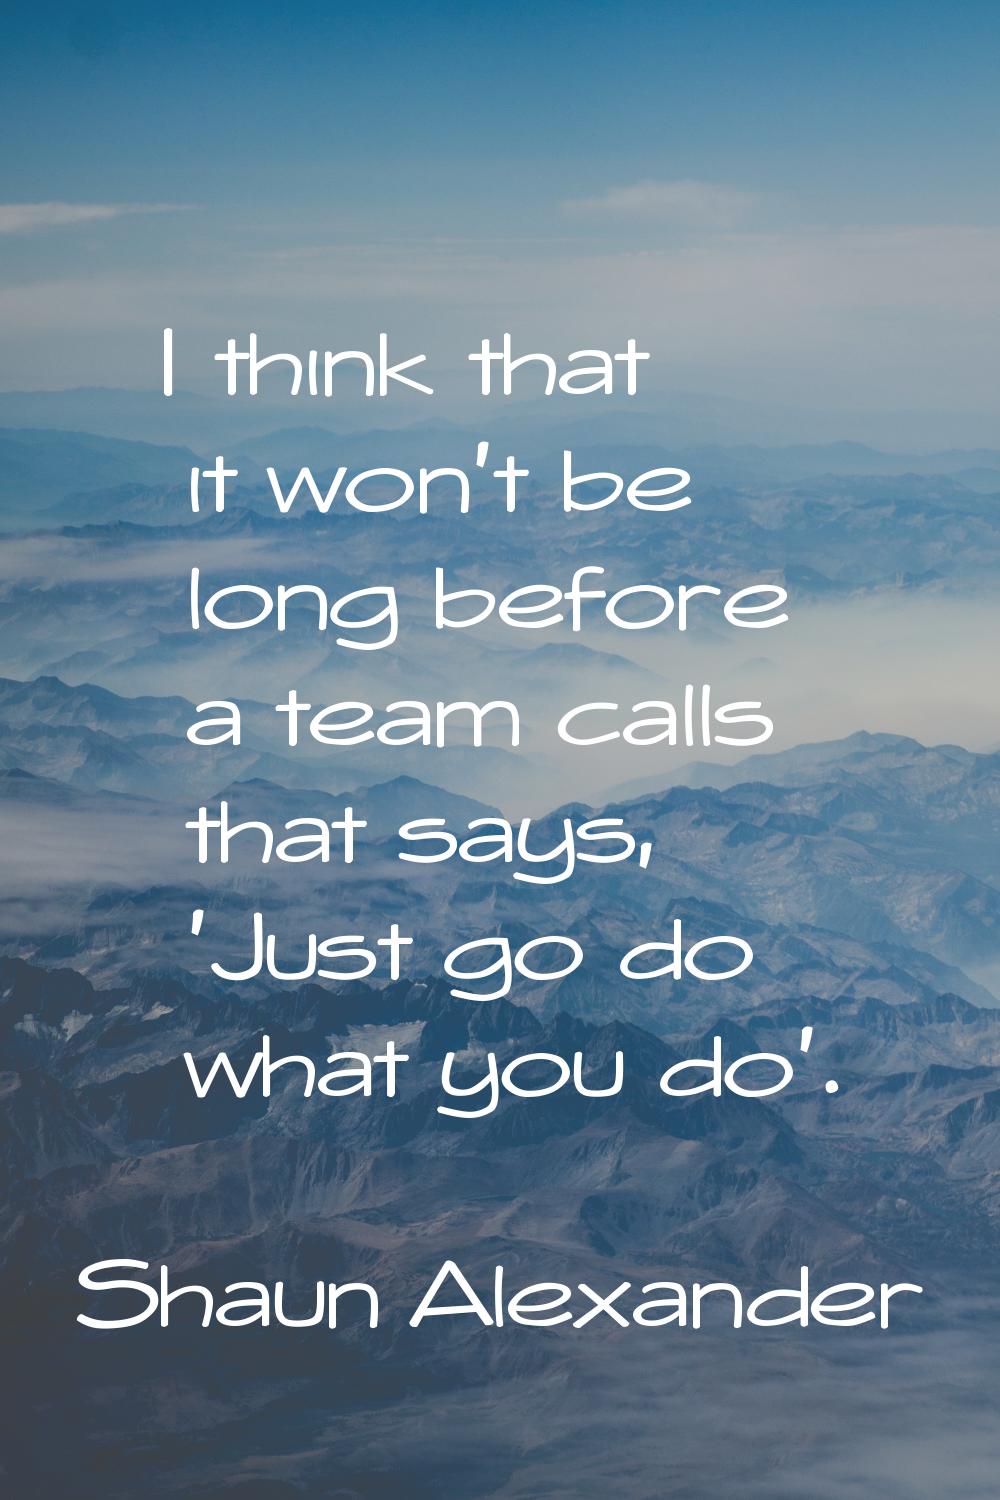 I think that it won't be long before a team calls that says, 'Just go do what you do'.